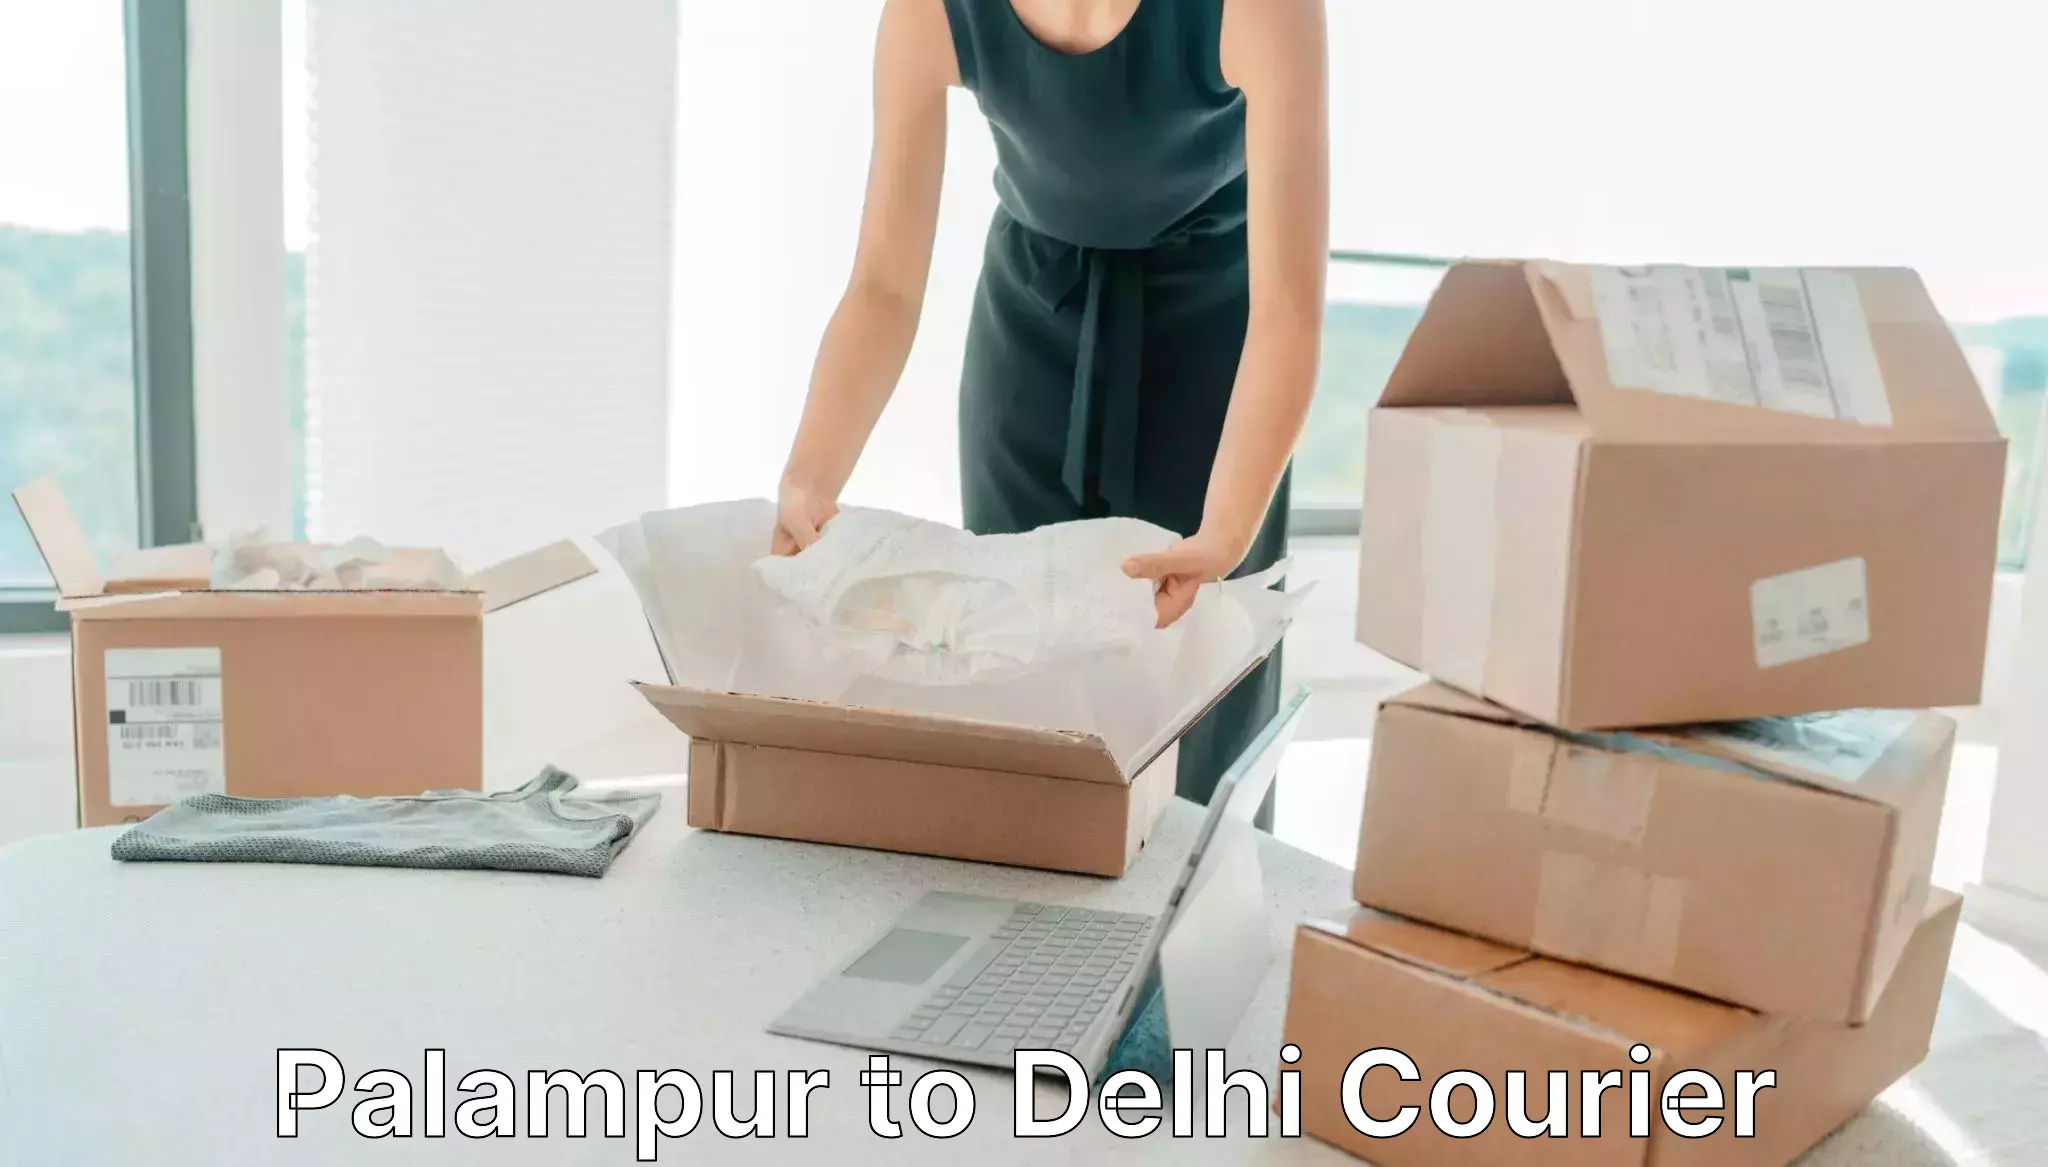 Cash on delivery service Palampur to University of Delhi